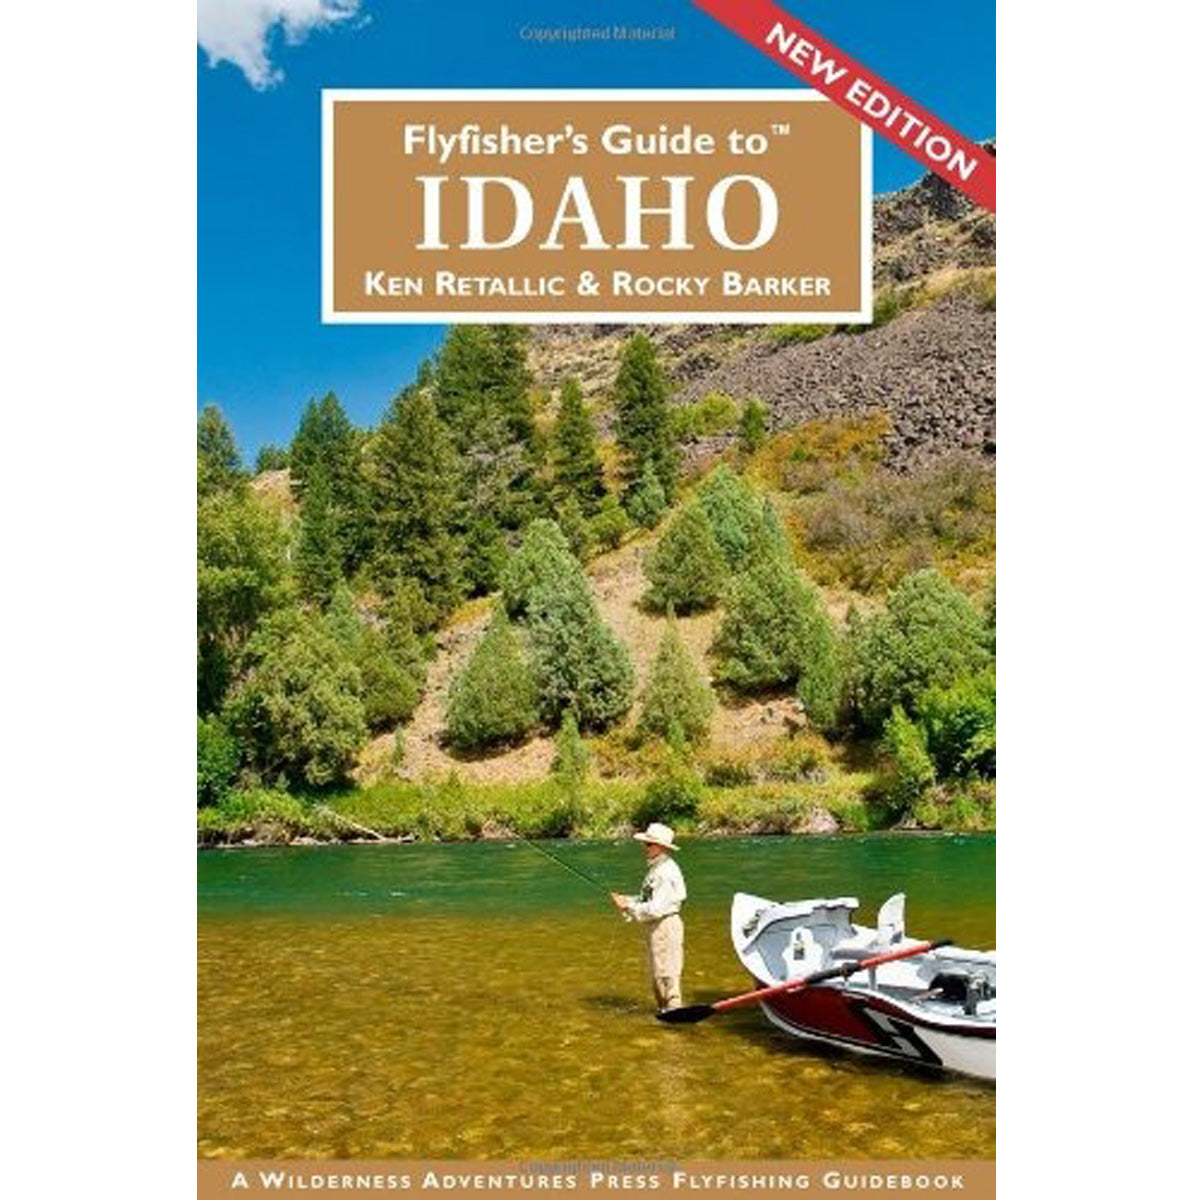 Flyfisher's Guide to Idaho